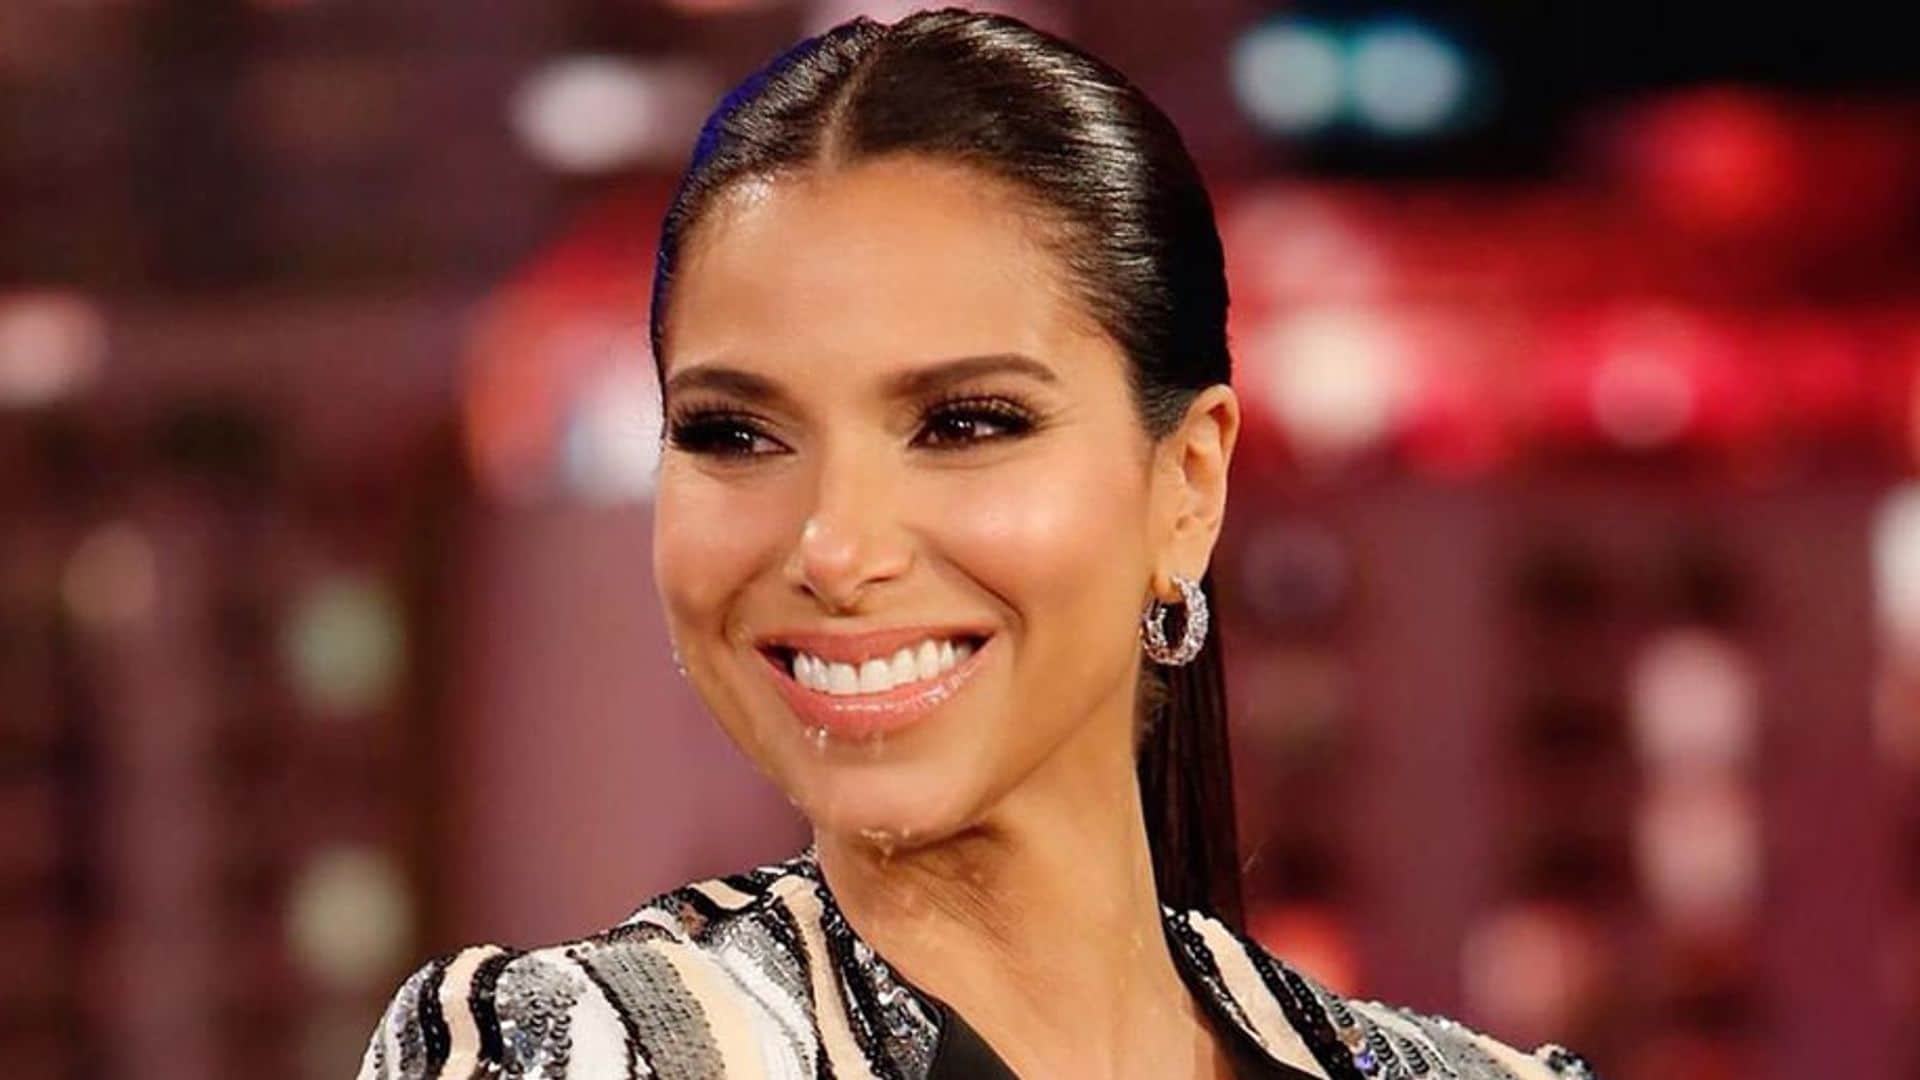 Roselyn Sanchez and Eric Winter's daughter had this cheeky thing to say about her parents kissing